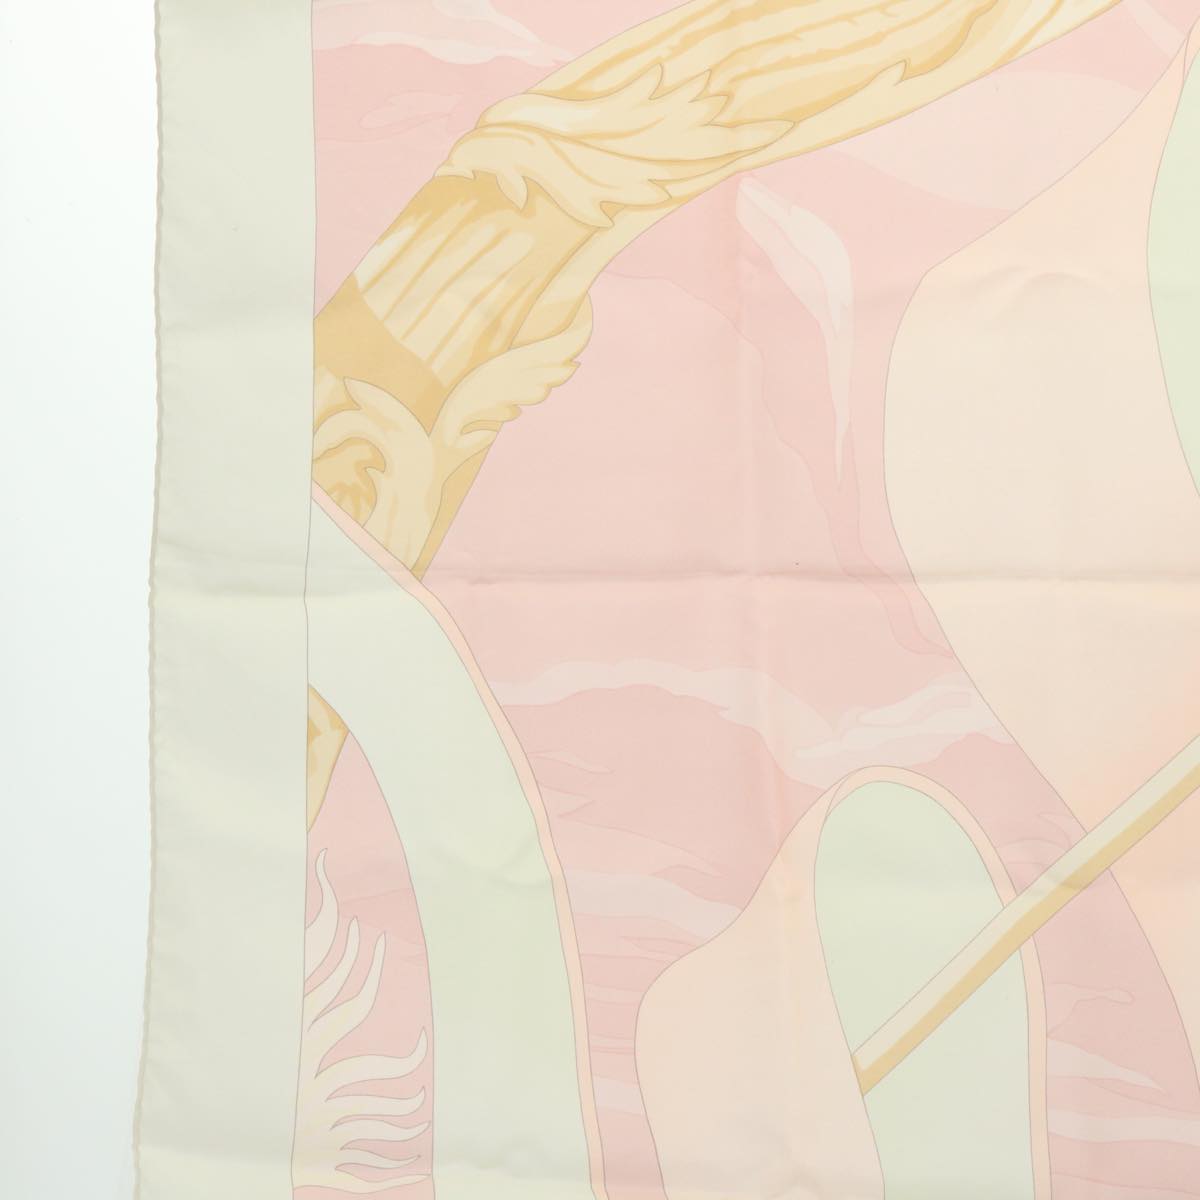 HERMES Carre 90 TURQUERIES 2 Scarf Silk Pink Beige Light blue Auth 51076